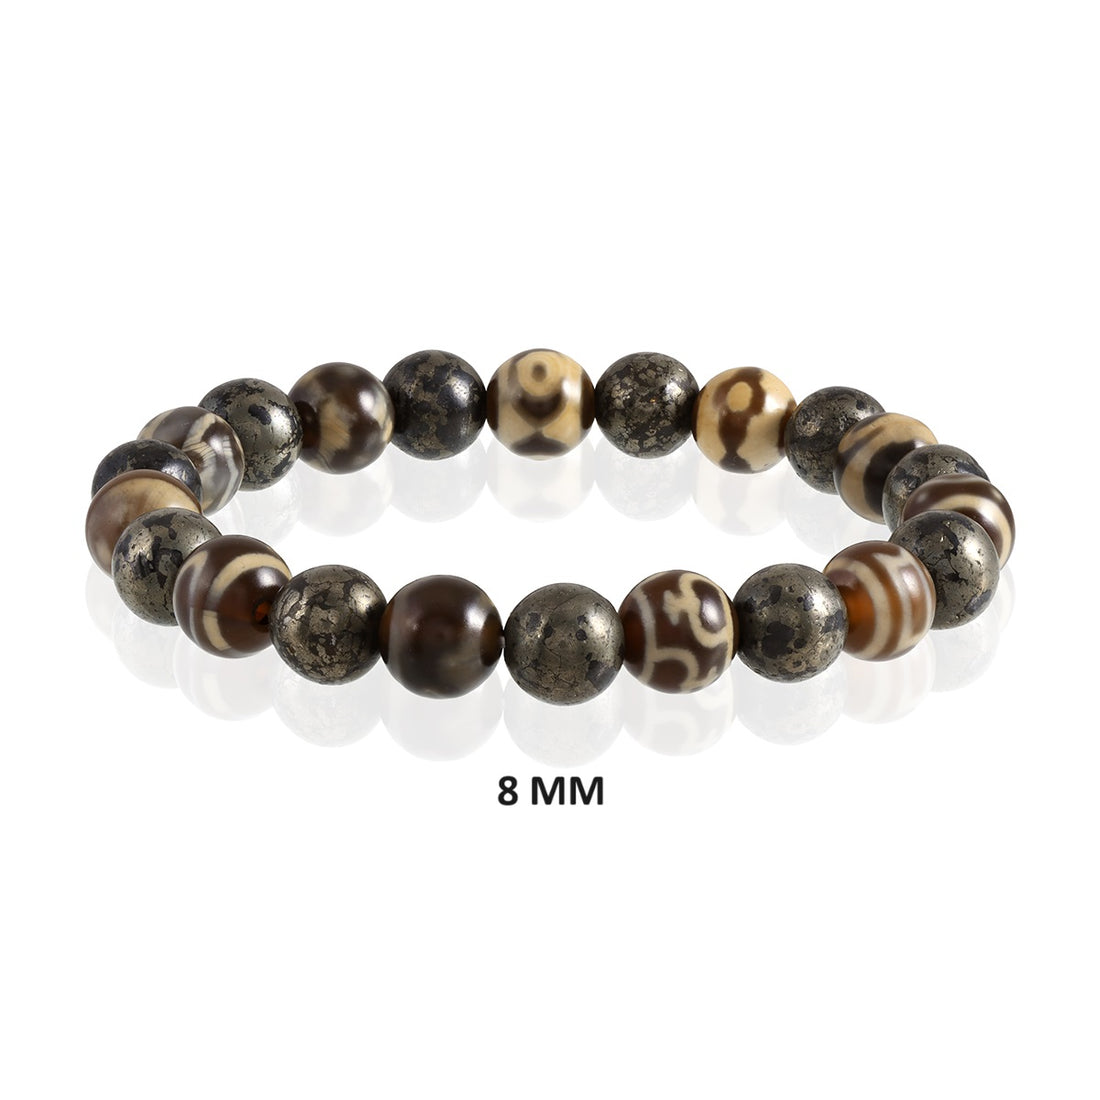 DZI Agate & Pyrite Harmony Bracelet with 8mm beads for balance, prosperity, and protection